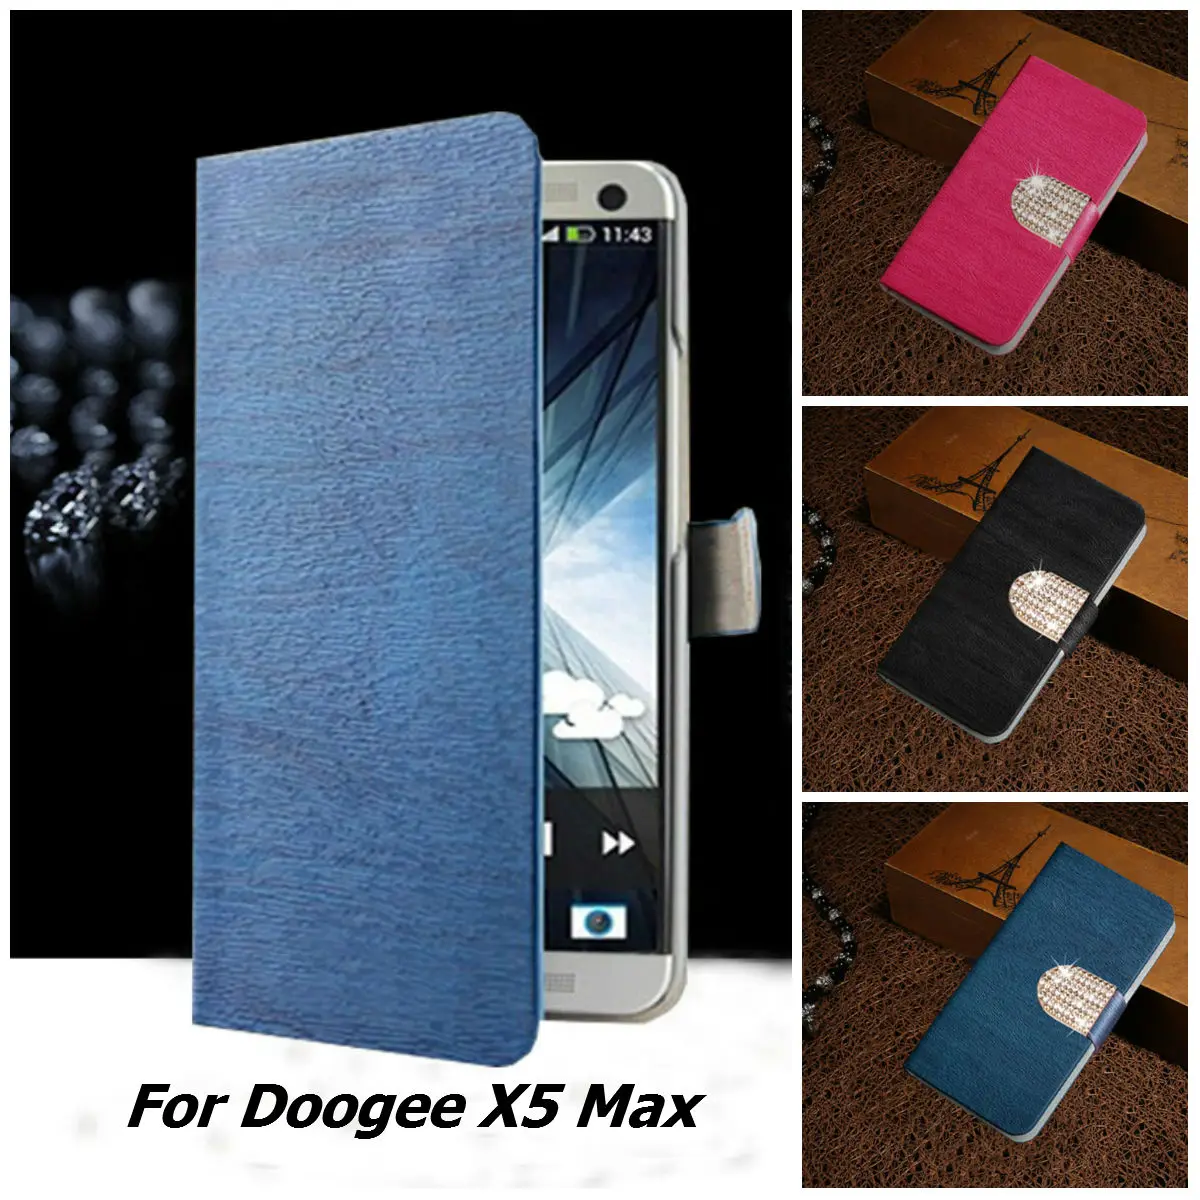 

New Arrival For DOOGEE X5 max /x5max pro Case Luxury Flip Leather Stand Case Hight Quality Wood PU Cover For DOOGEE X5 Max